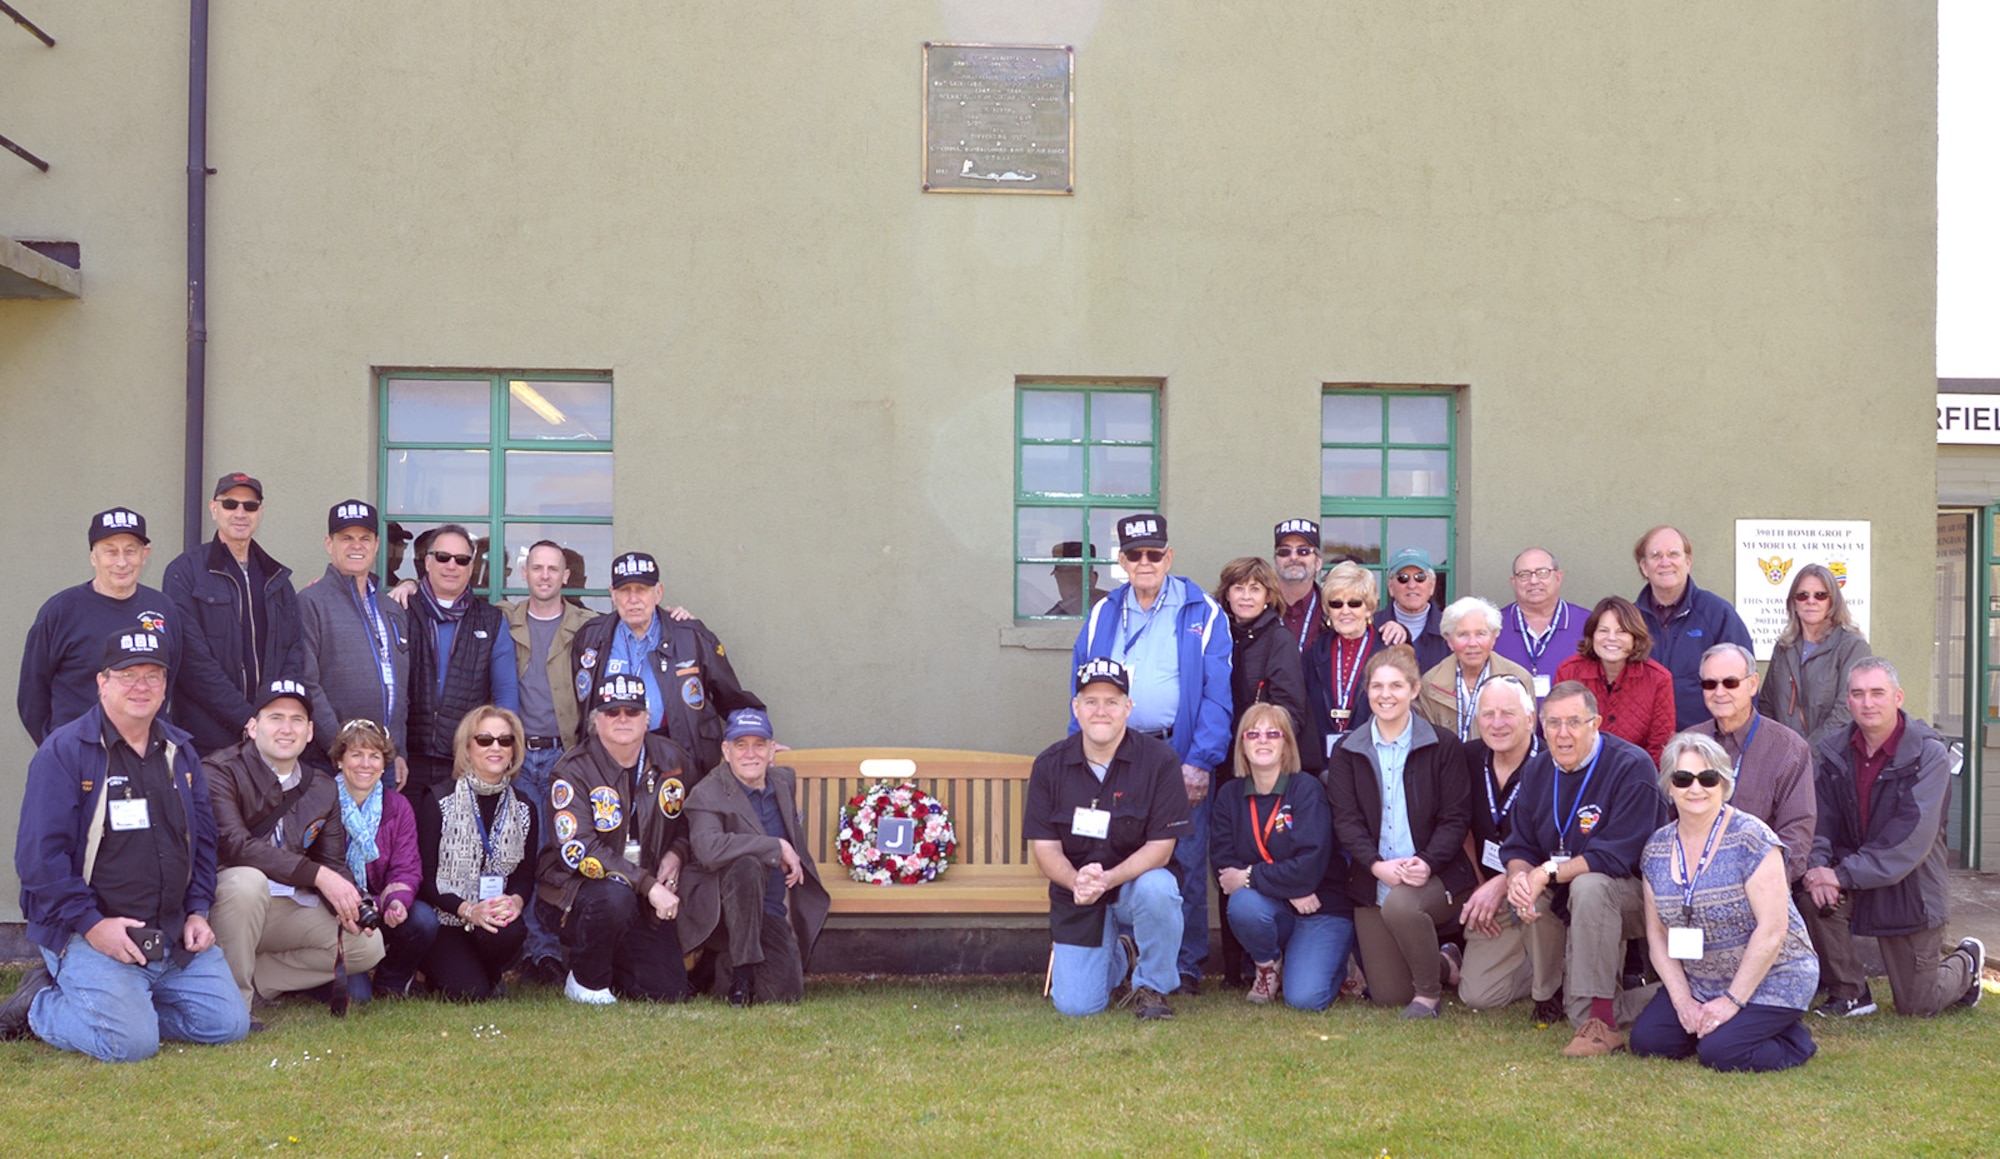 Members of the 100th Bomb Group Foundation, 100th BG veterans and their families, are joined by Airmen from the 100th Air Refueling Wing as they pose for a photograph May 10, 2017, at Parham Airfield Museum, England. The group visited RAF Mildenhall and toured former World War II bases around East Anglia including Thorpe Abbots (home of the 100th Bomb Group), Horham and Rattlesden. (U.S. Air Force photo by Karen Abeyasekere)